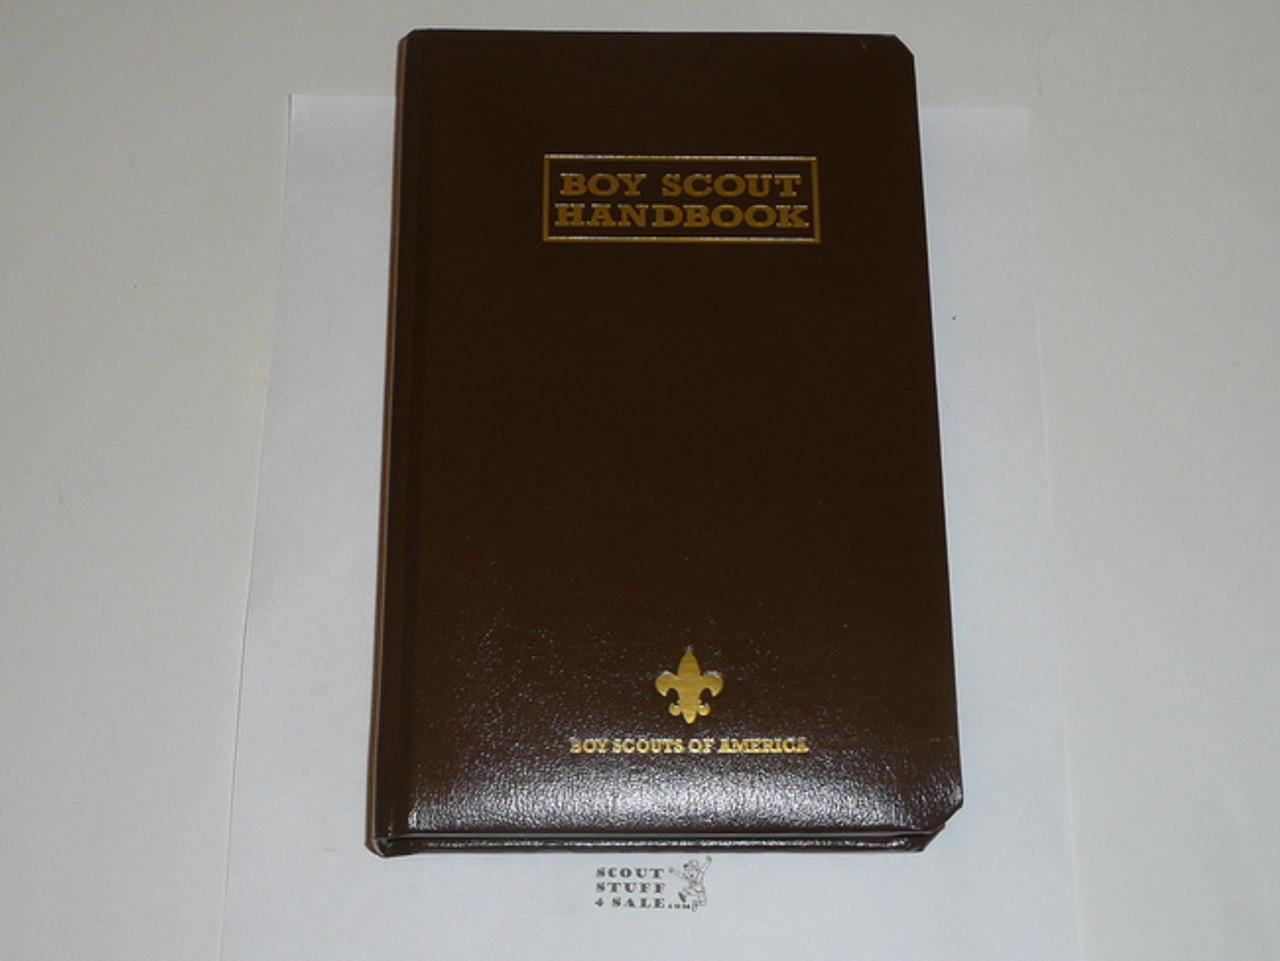 1998 Boy Scout Handbook, Eleventh Edition, First Printing, RARE Leather binding non-numbered, MINT condition